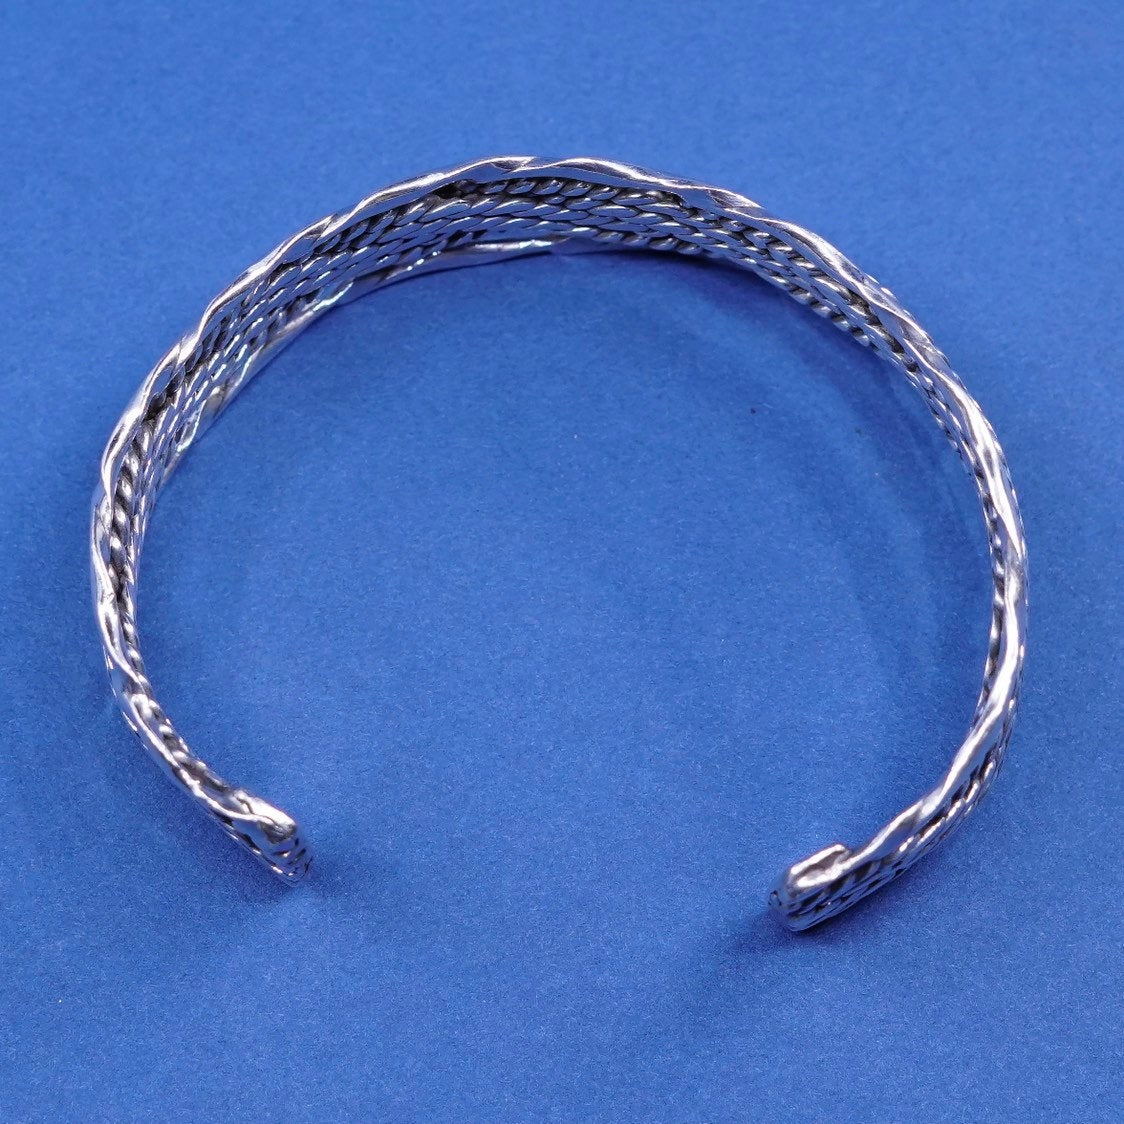 6.75", vtg Mexico sterling silver handmade bracelet wide 925 twisted cable cuff